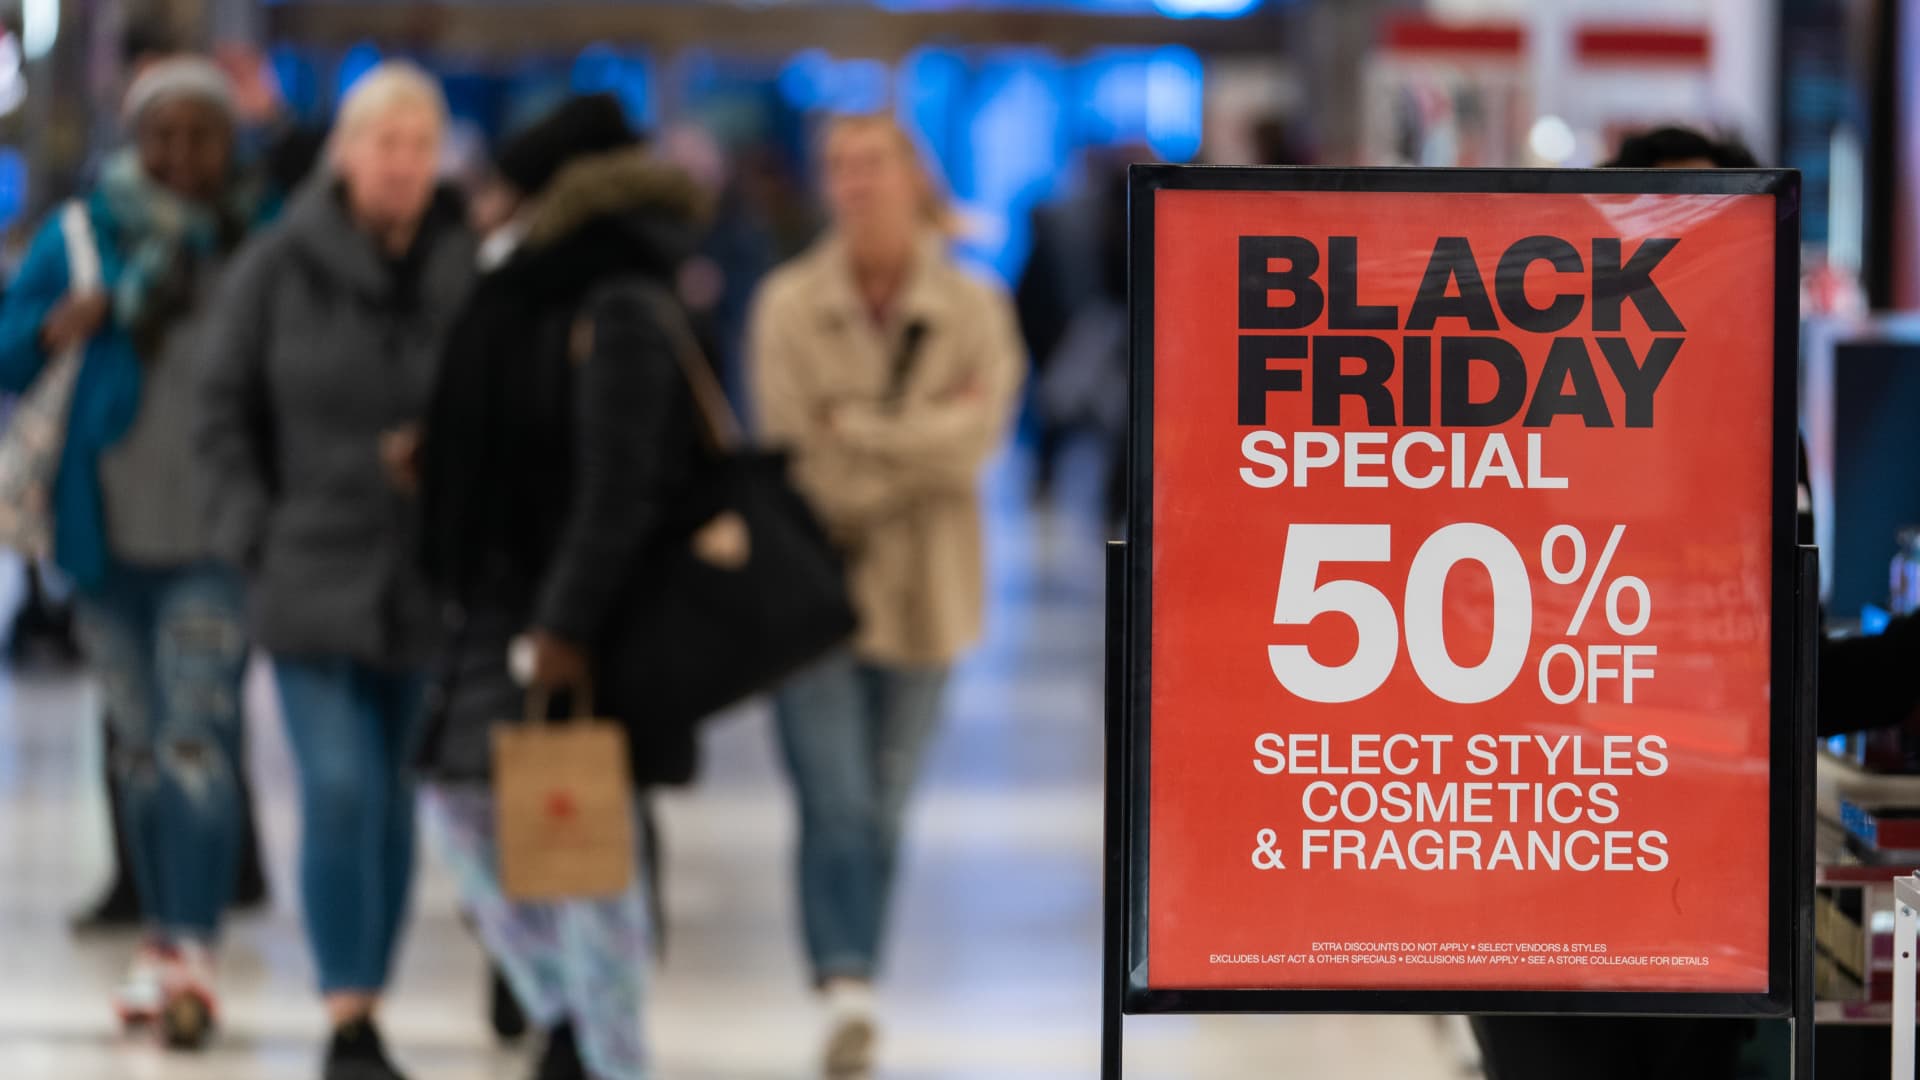 130+ best Black Friday deals you can still shop: Amazon, Best Buy, Apple, Walmart and more - CNBC (Picture 1)